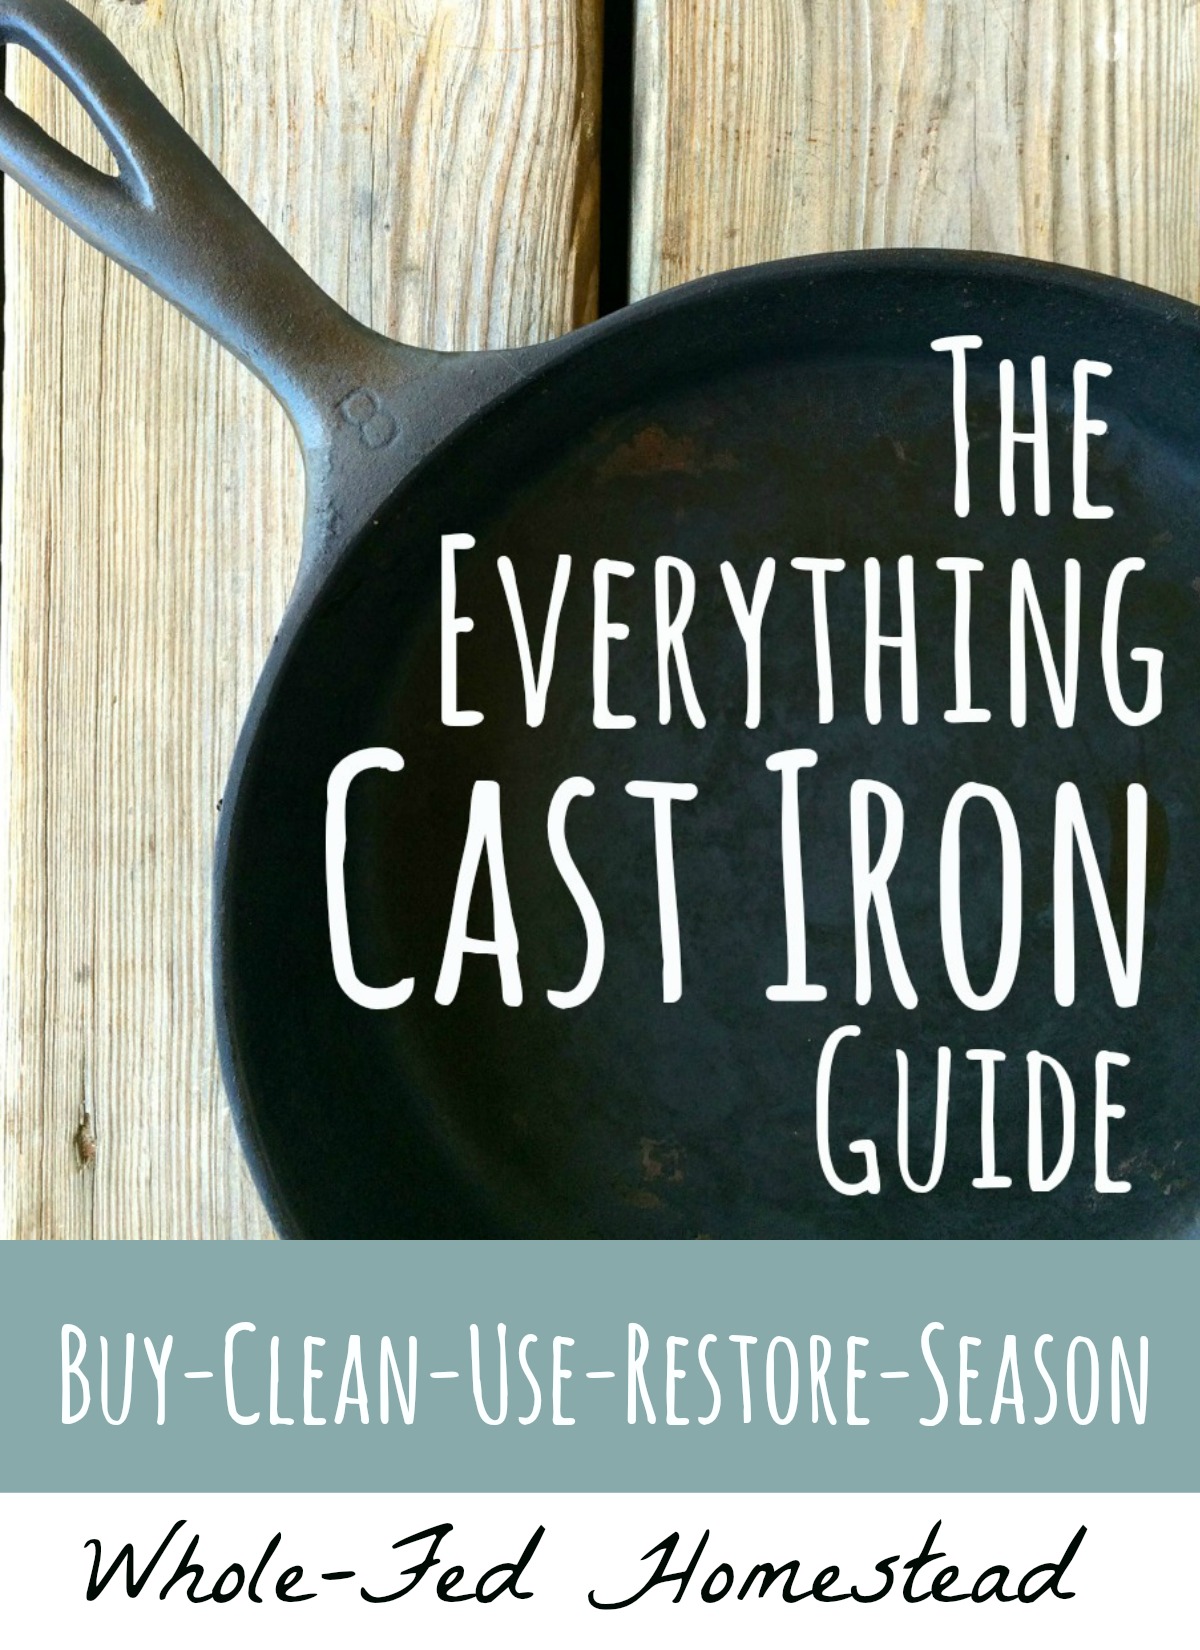 https://wholefedhomestead.com/wp-content/uploads/2015/04/The-Everything-Cast-Iron-Guide-Feature.jpg